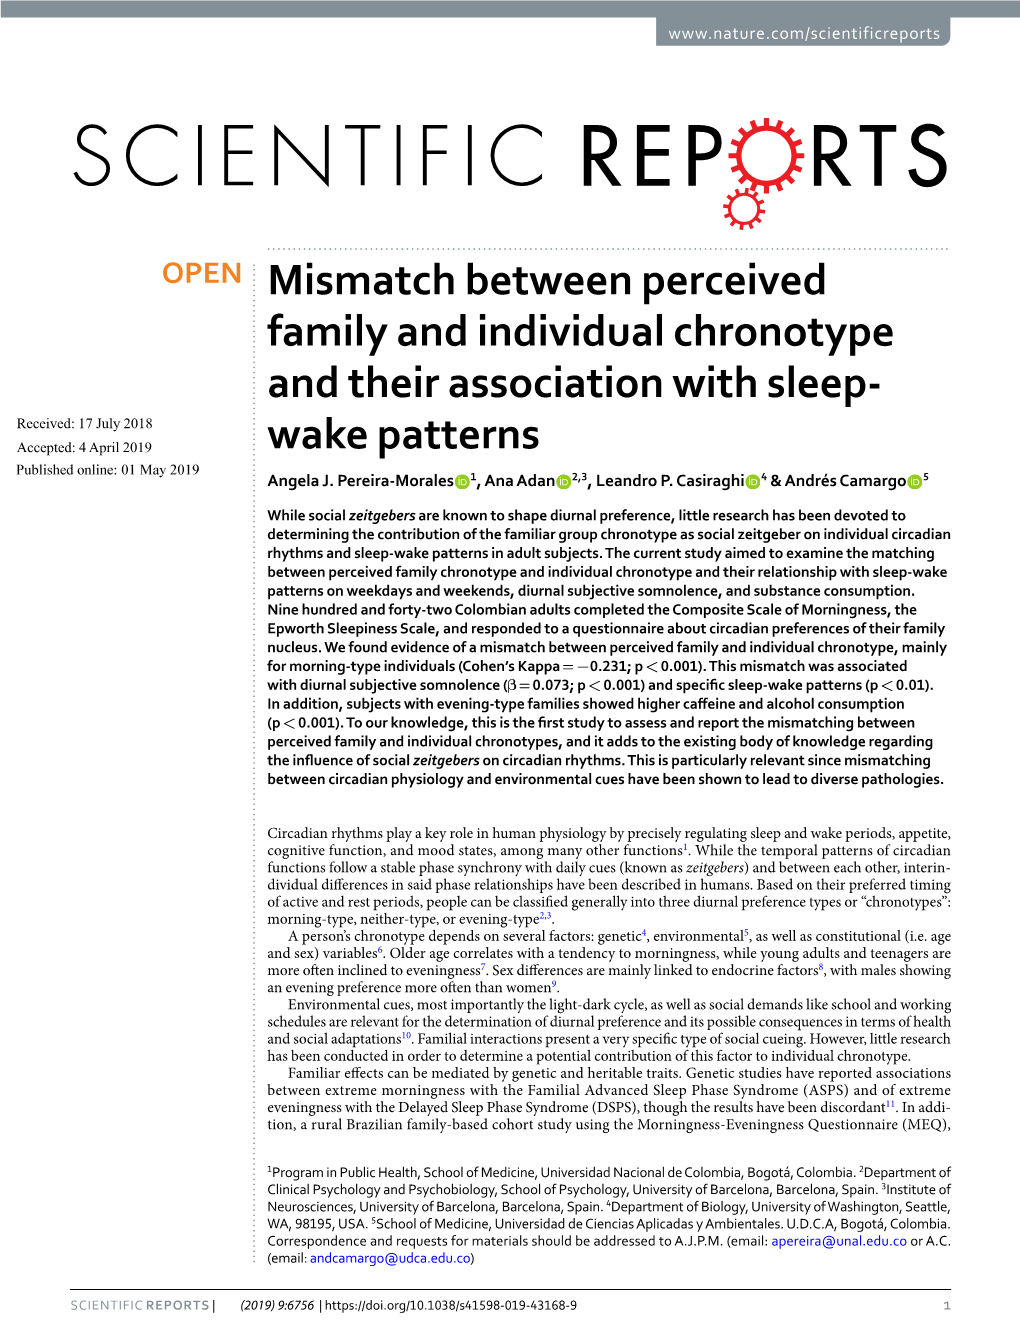 Mismatch Between Perceived Family and Individual Chronotype and Their